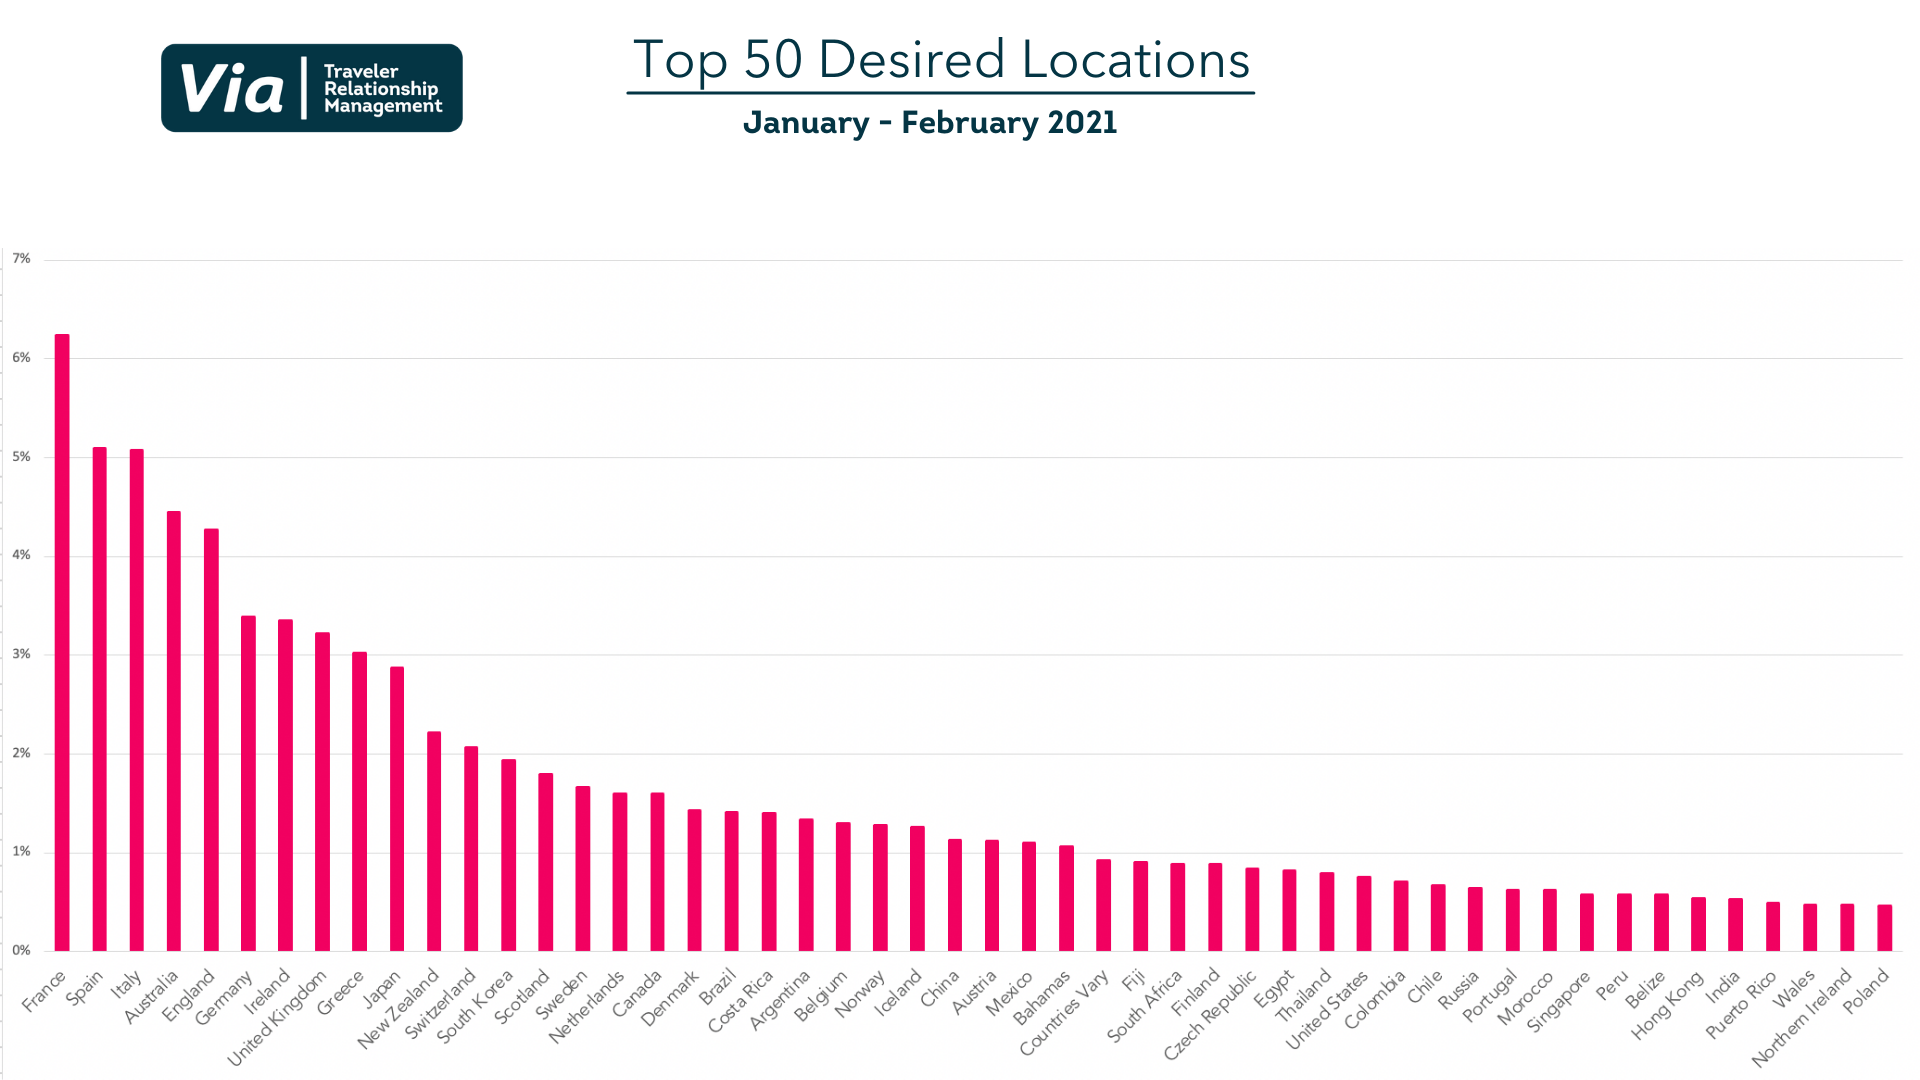 Top 50 Desired Locations